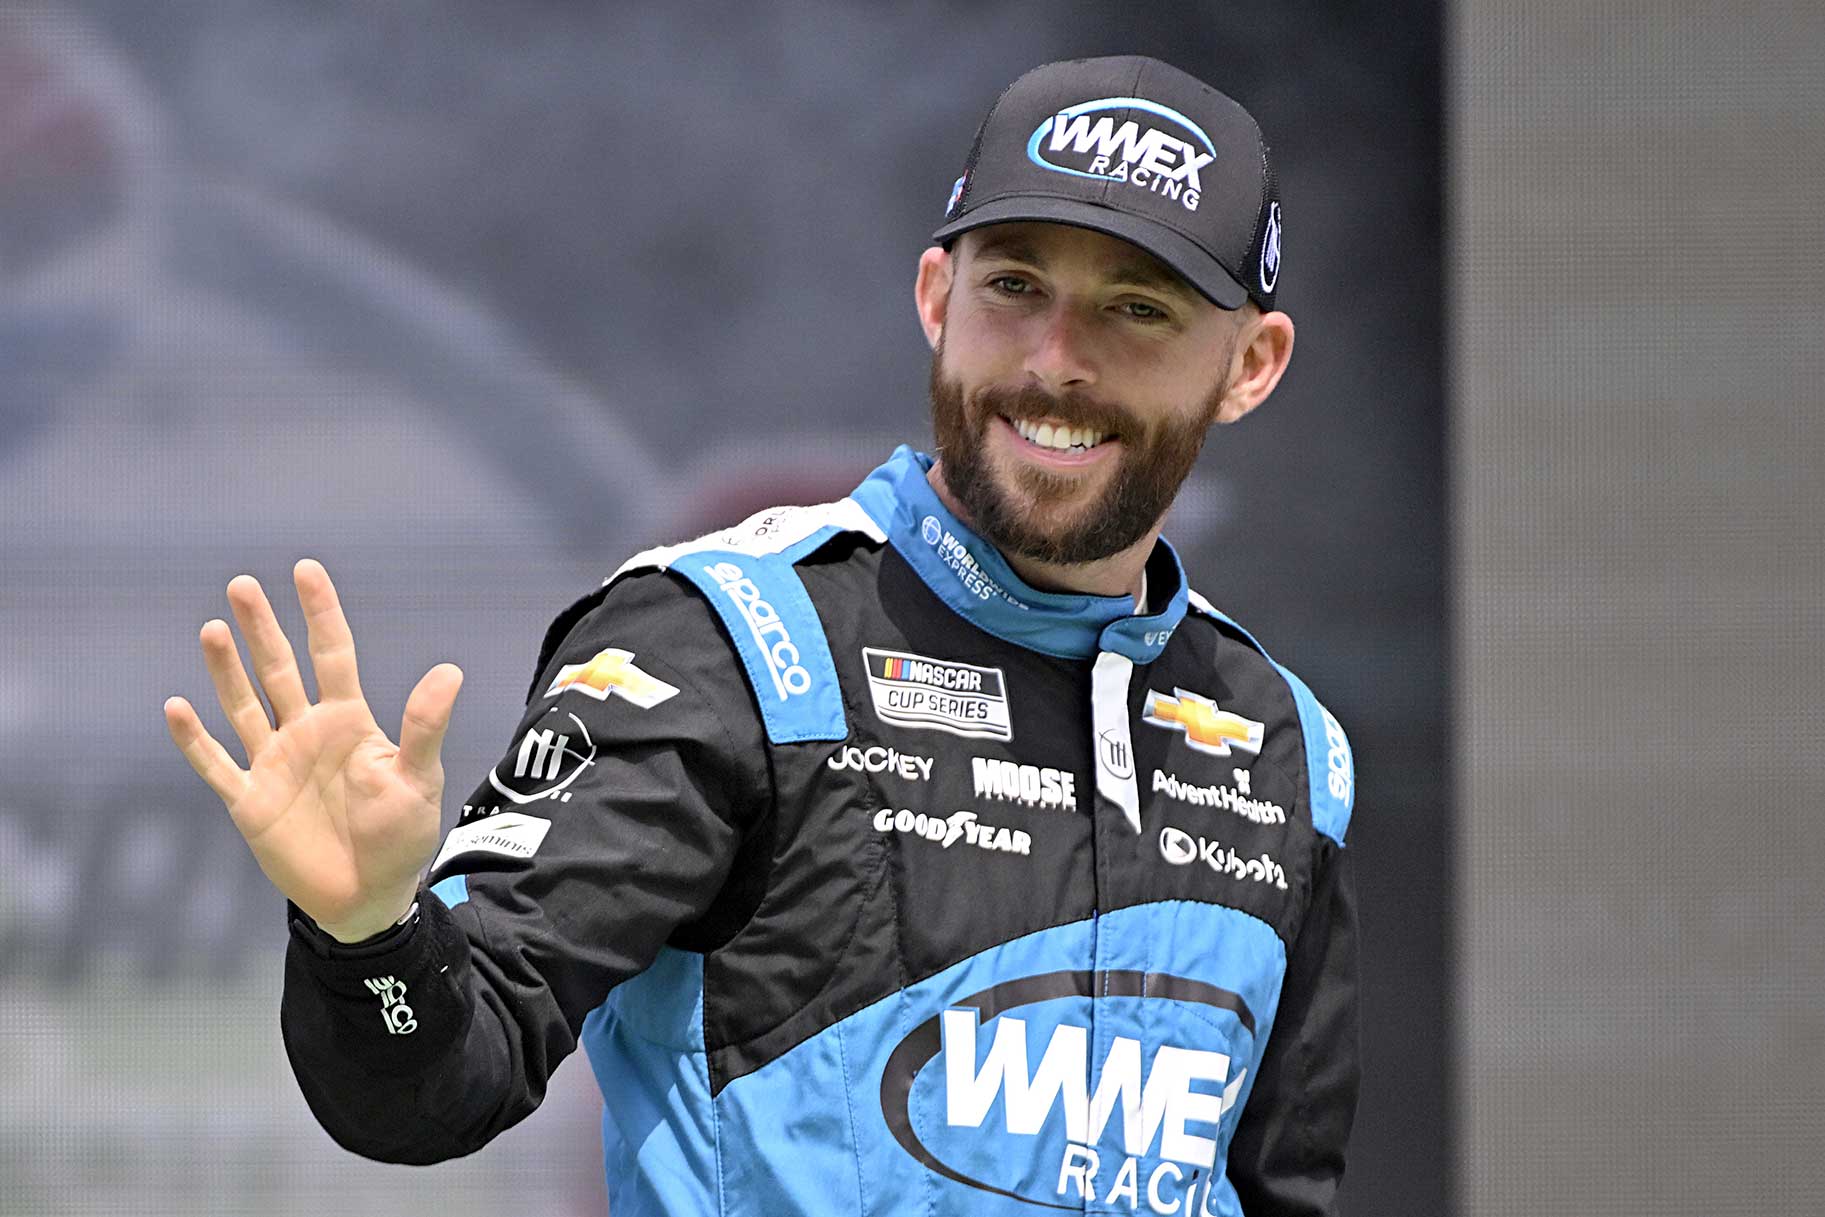 Ross Chastain Waves To Fans